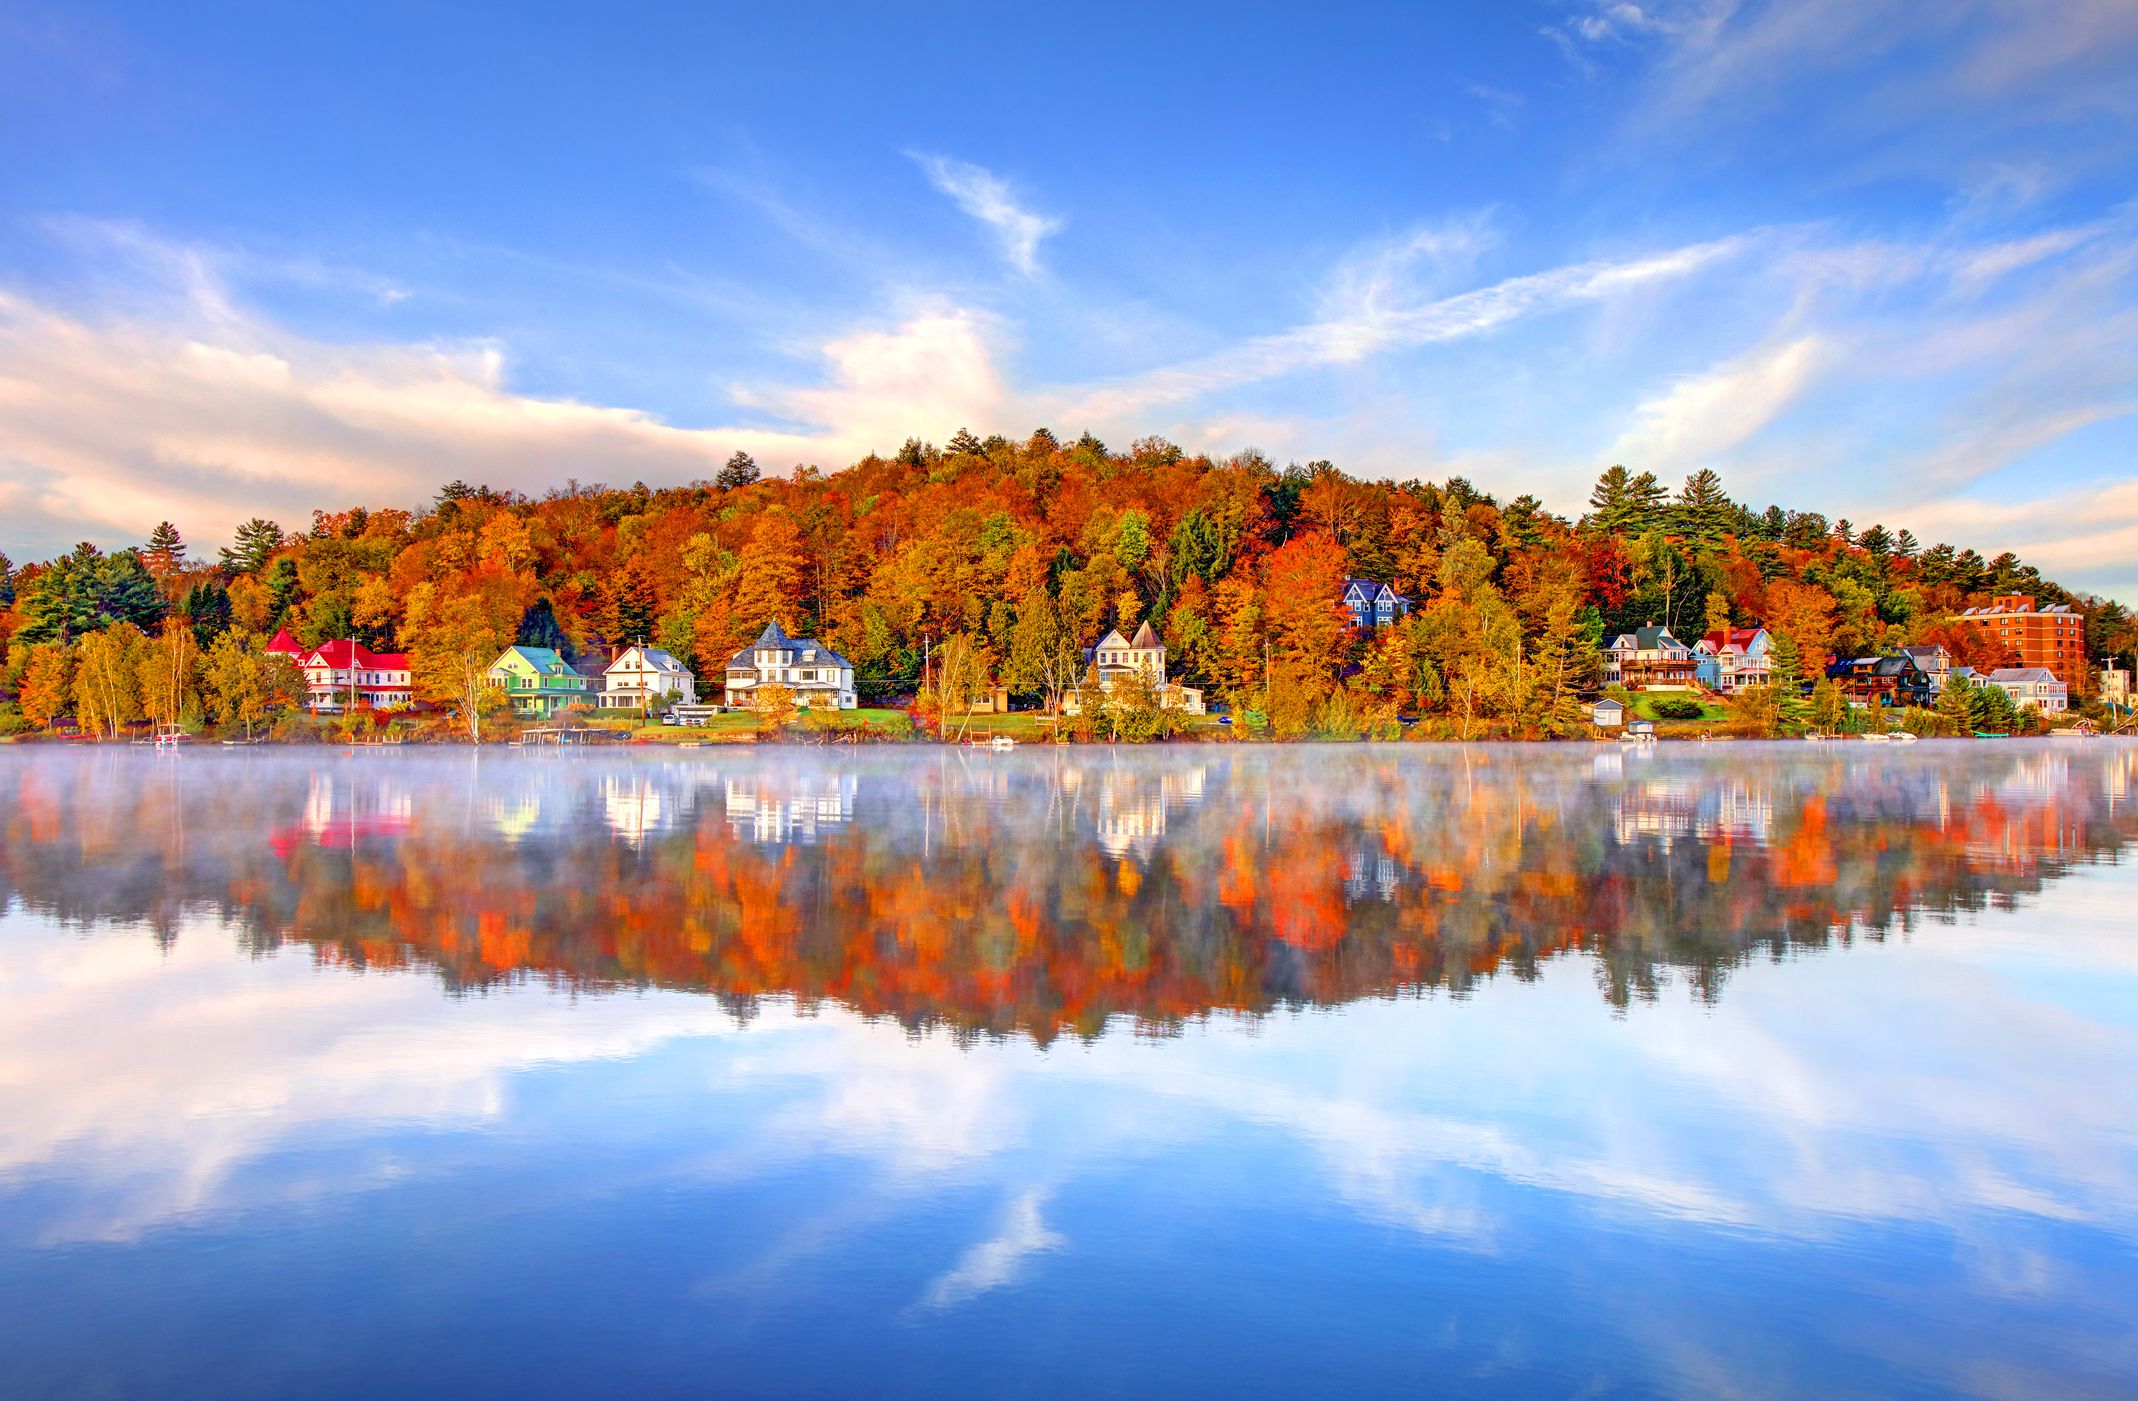 25 Best Places to See Fall Foliage in the U.S. 2023